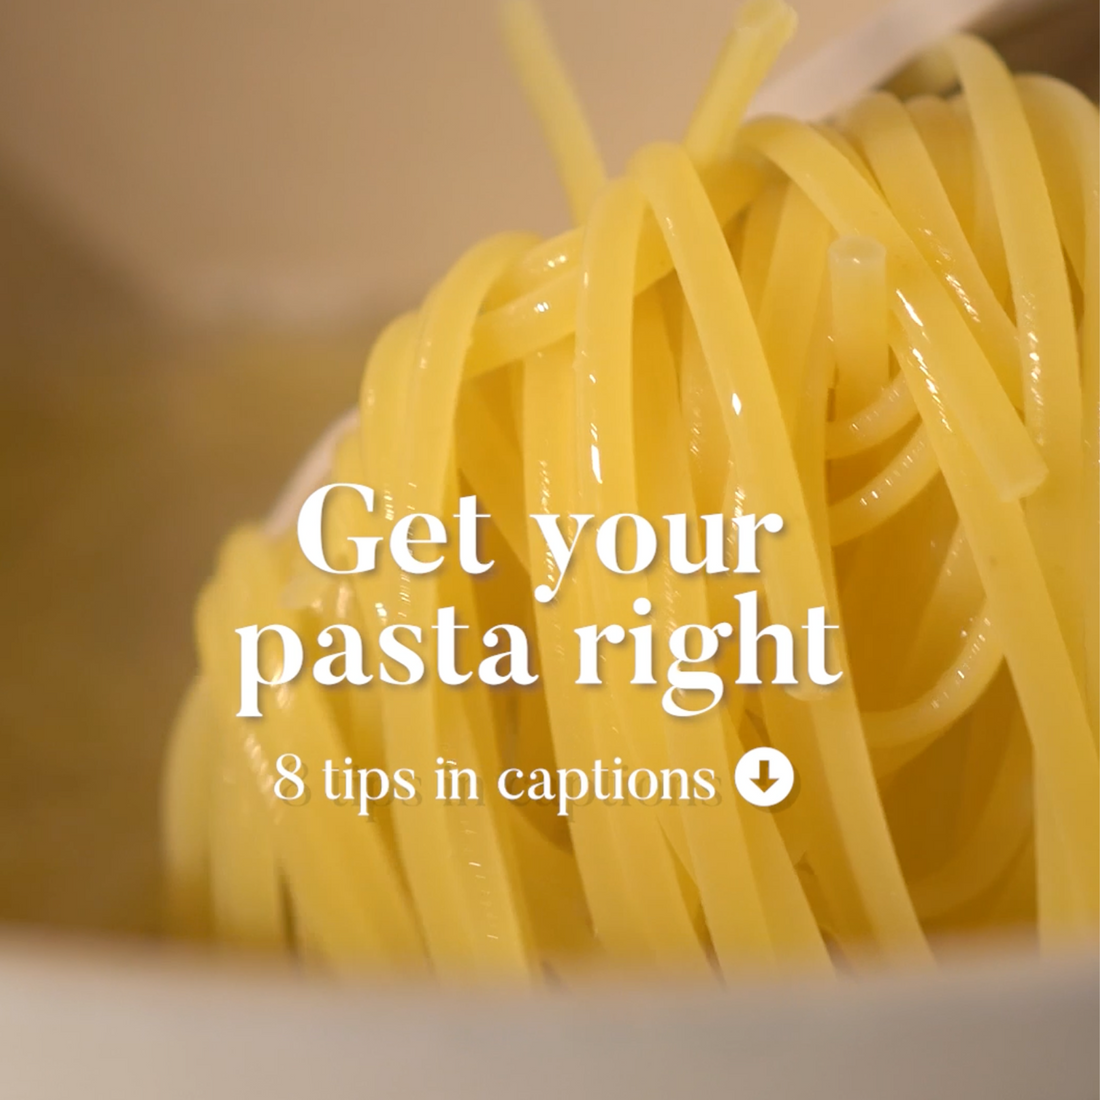 Get your pasta right: 8 tips